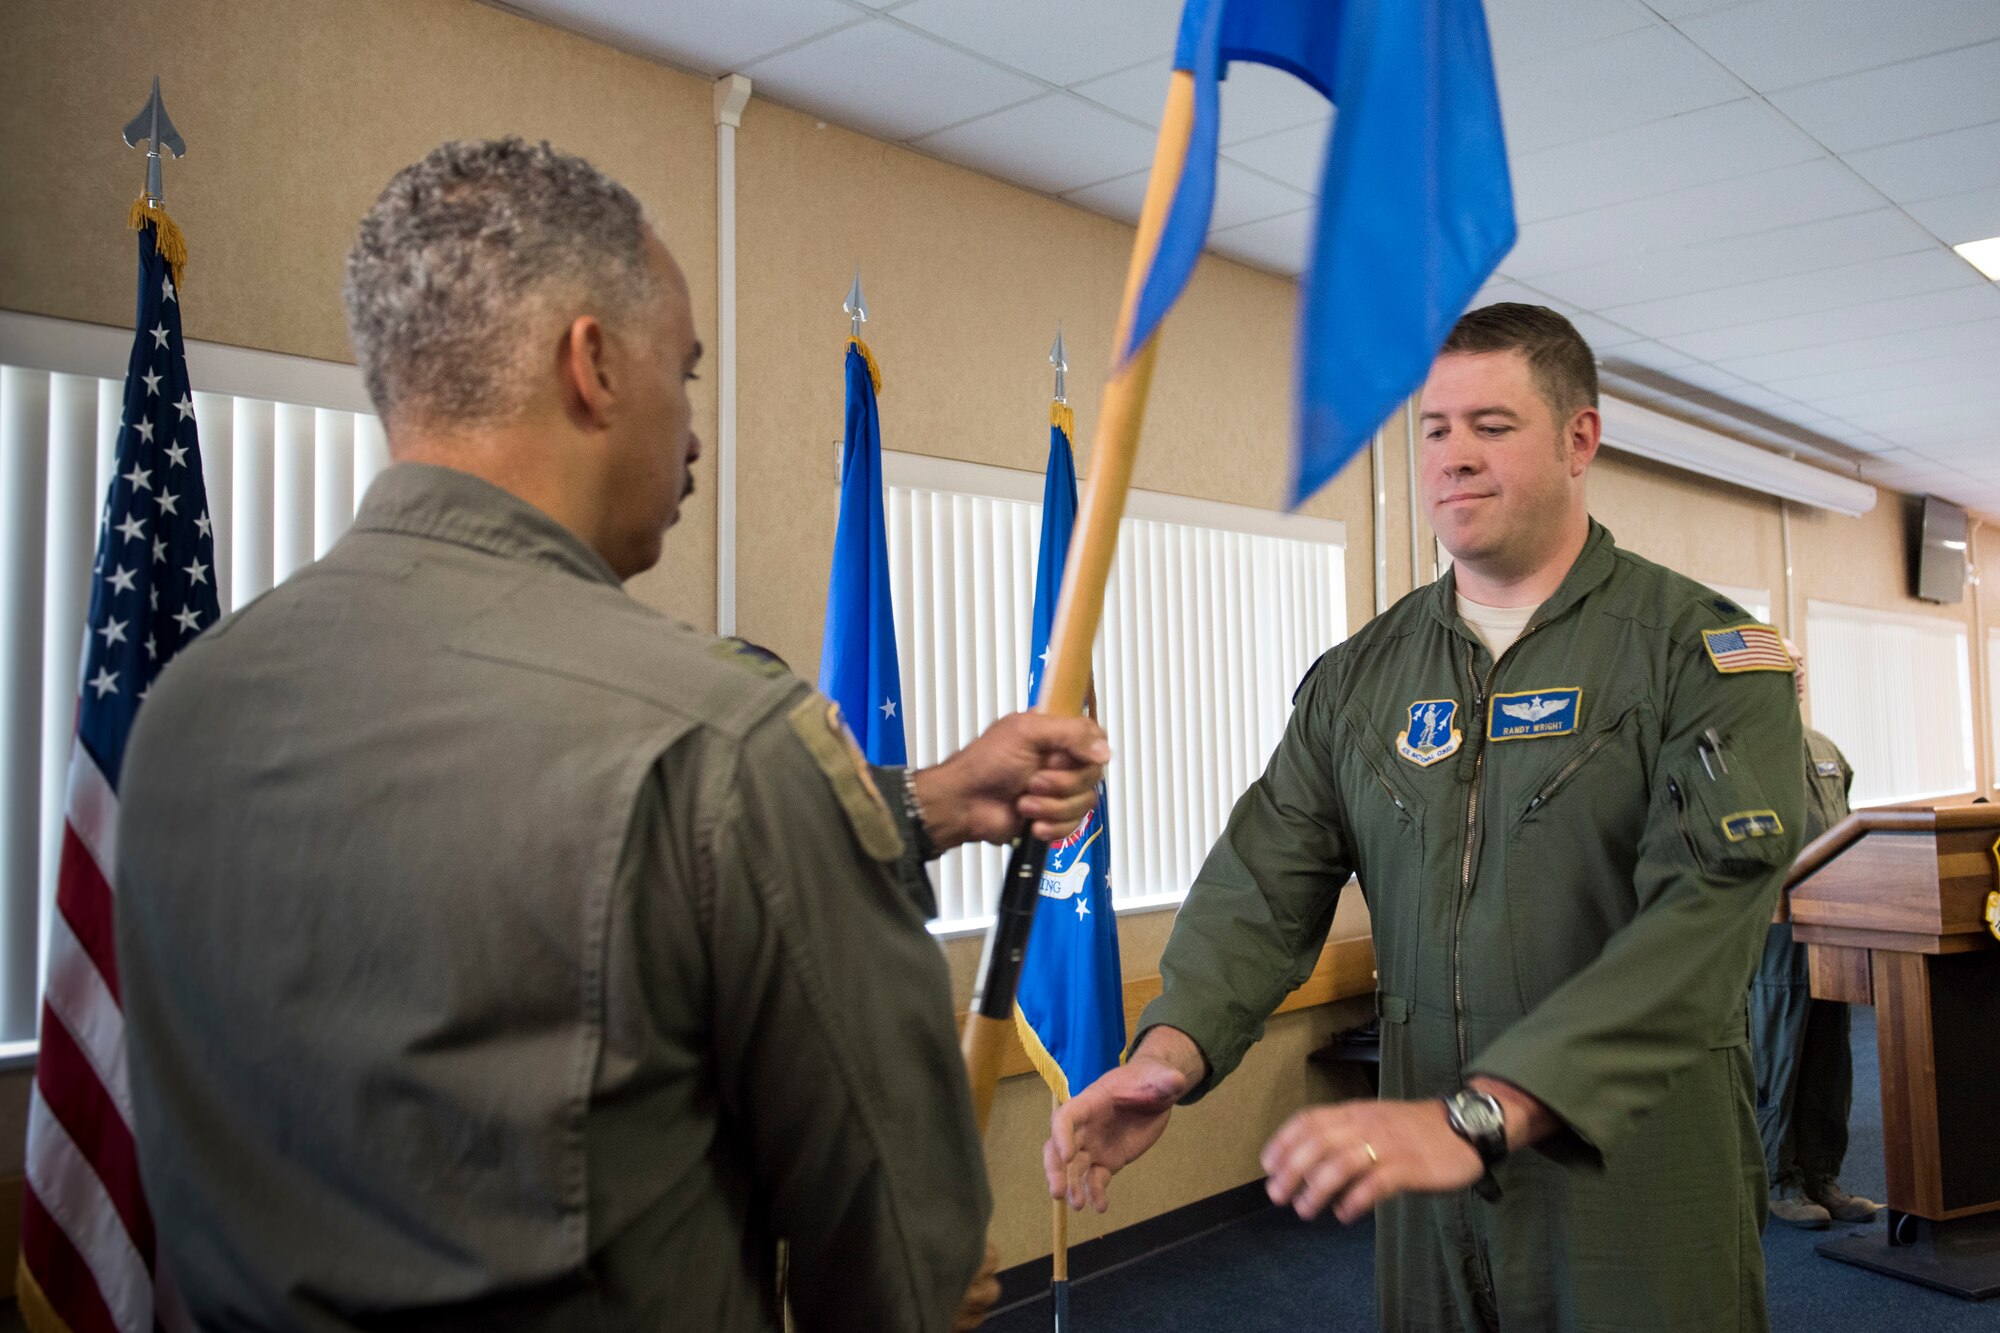 167th Airlift Wing Commander, Col. David Cochran, hands a guidon to Lt. Col. Randy Wright marking Wright’s assumption of command of the 167th Airlift Squadron during a ceremony in the 167th Airlift Wing’s dining facility, June 6, 2019. (U.S. Air National Guard photo by Senior Master Sgt. Emily Beightol-Deyerle)